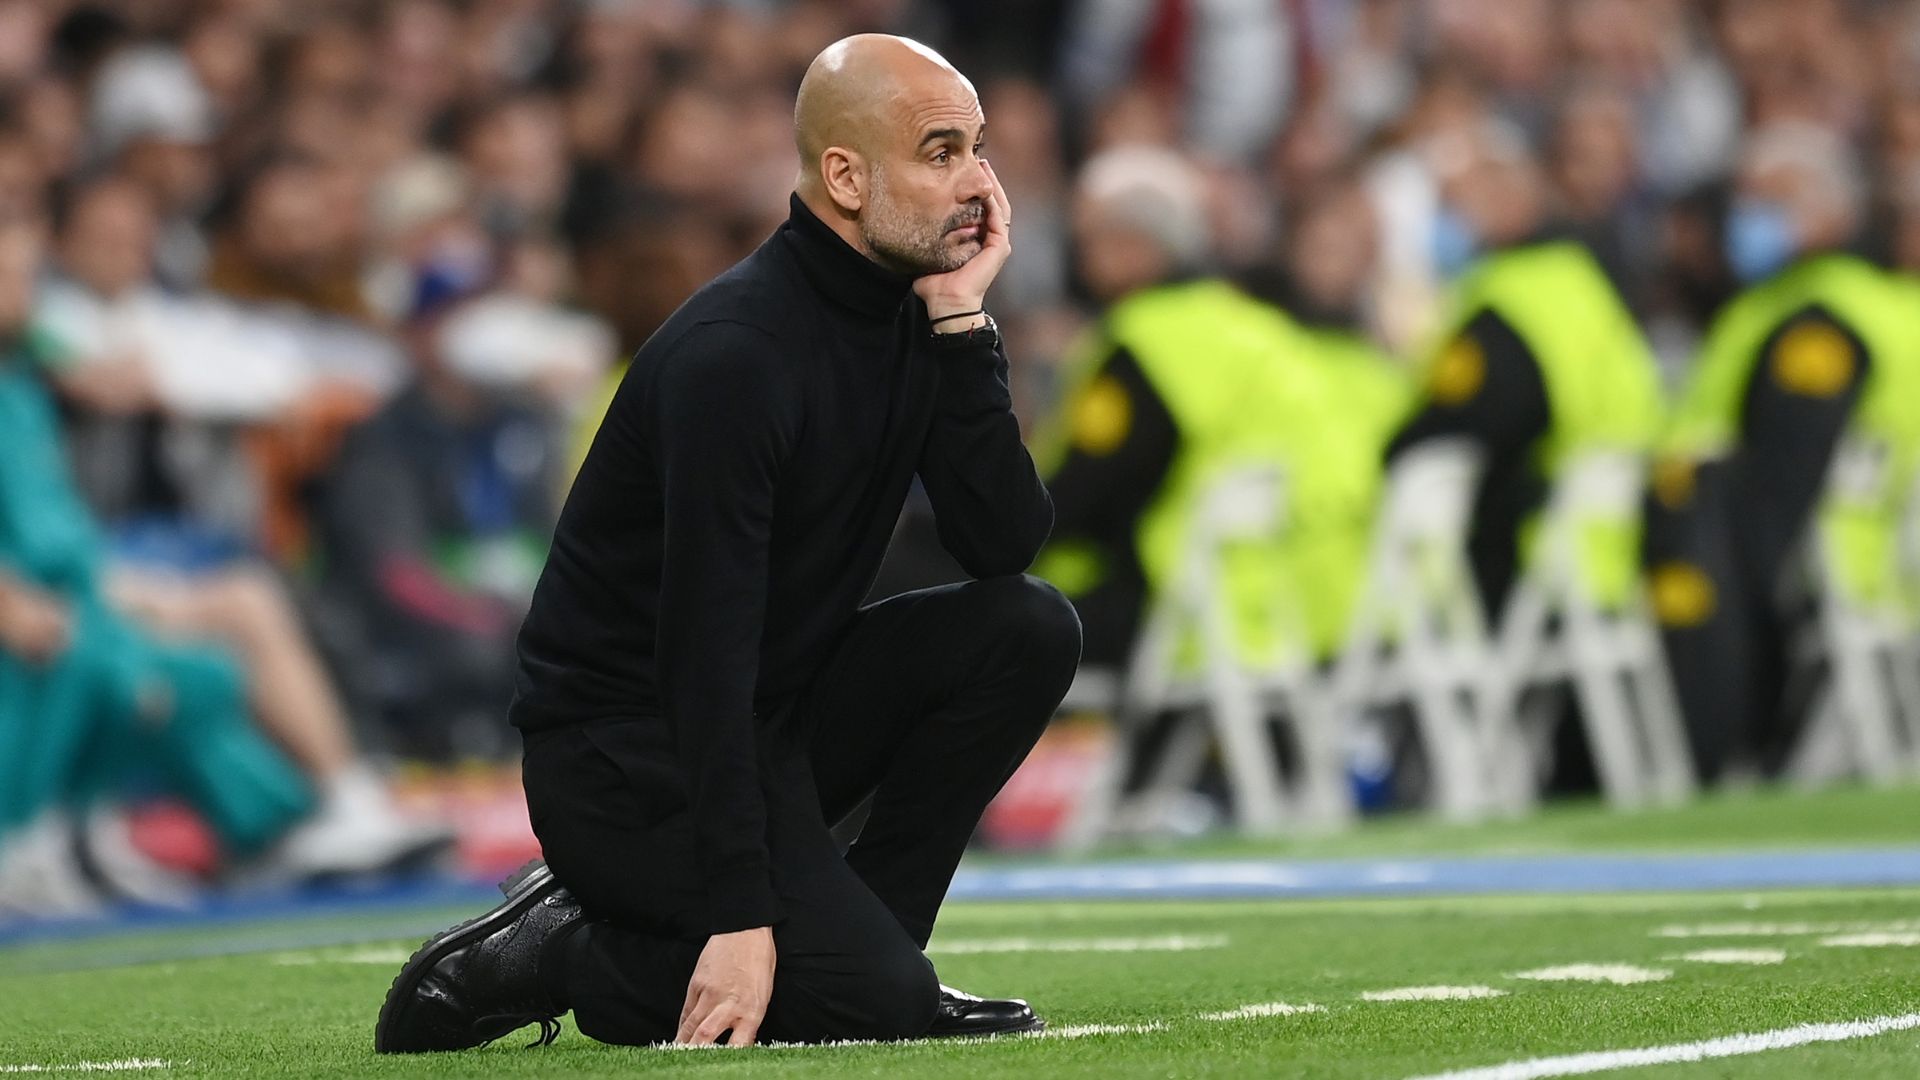 Pep Guardiola during the second leg of the semi-final of the last Champions League (Credit: Getty Images)